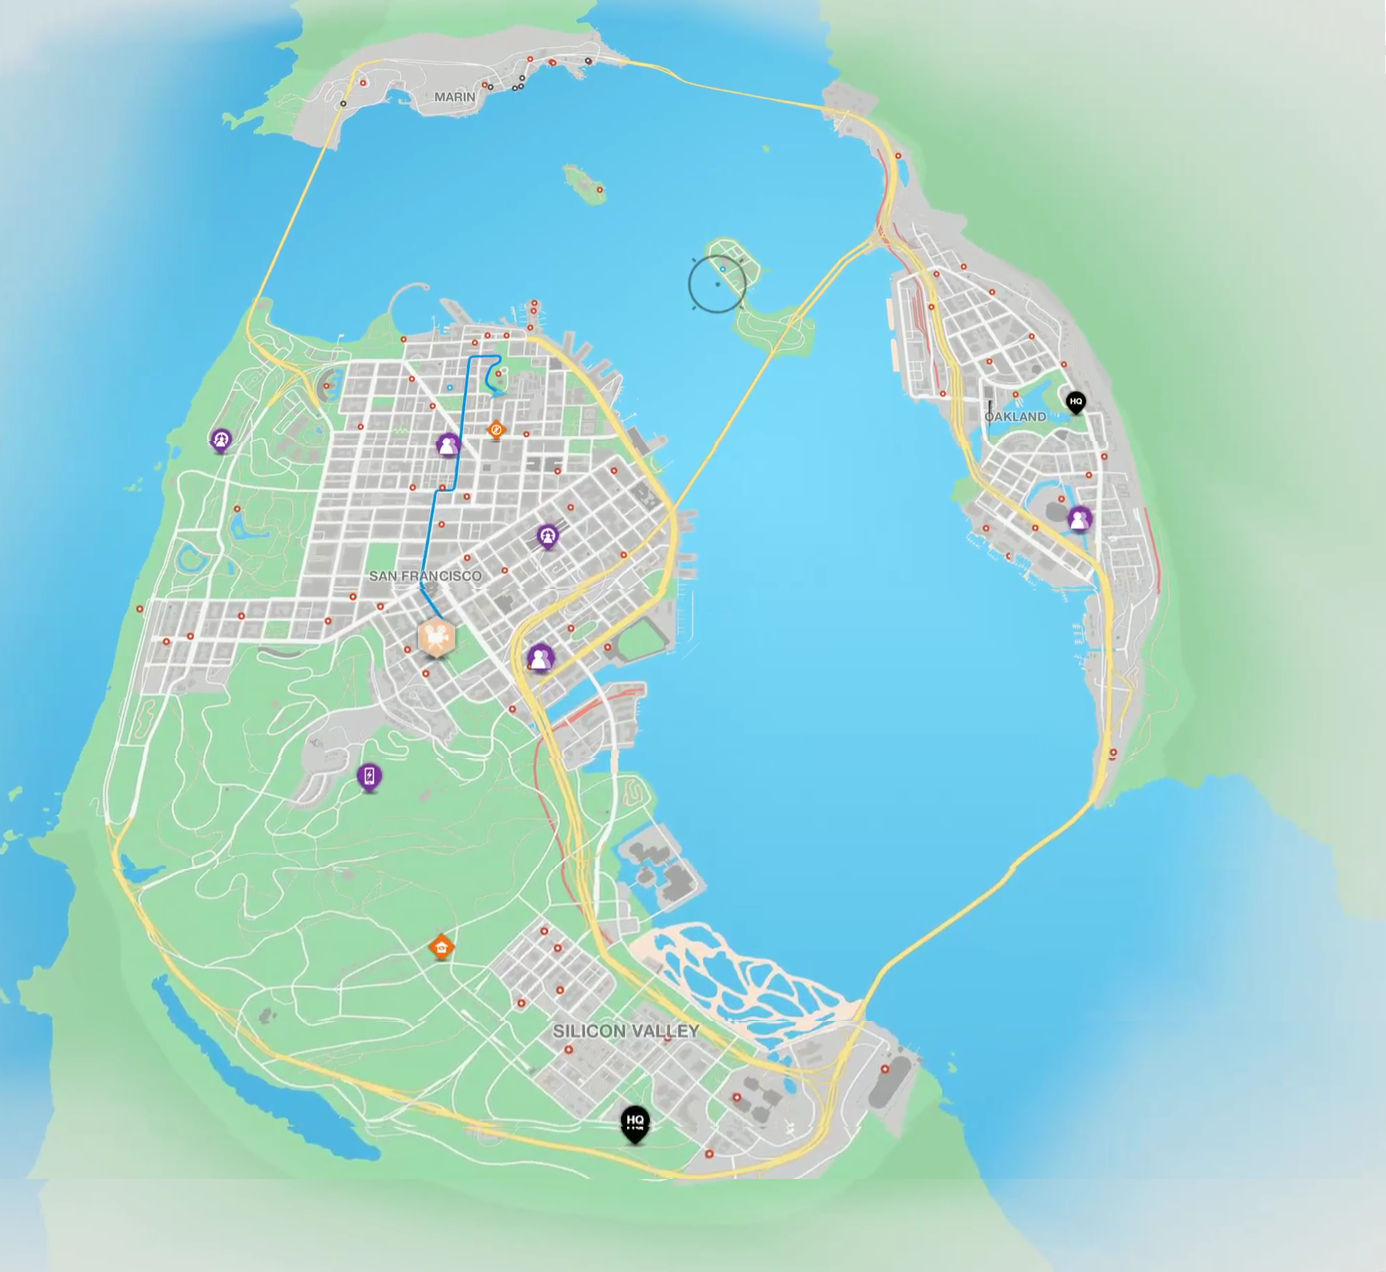 sleeping dogs definitive edition map